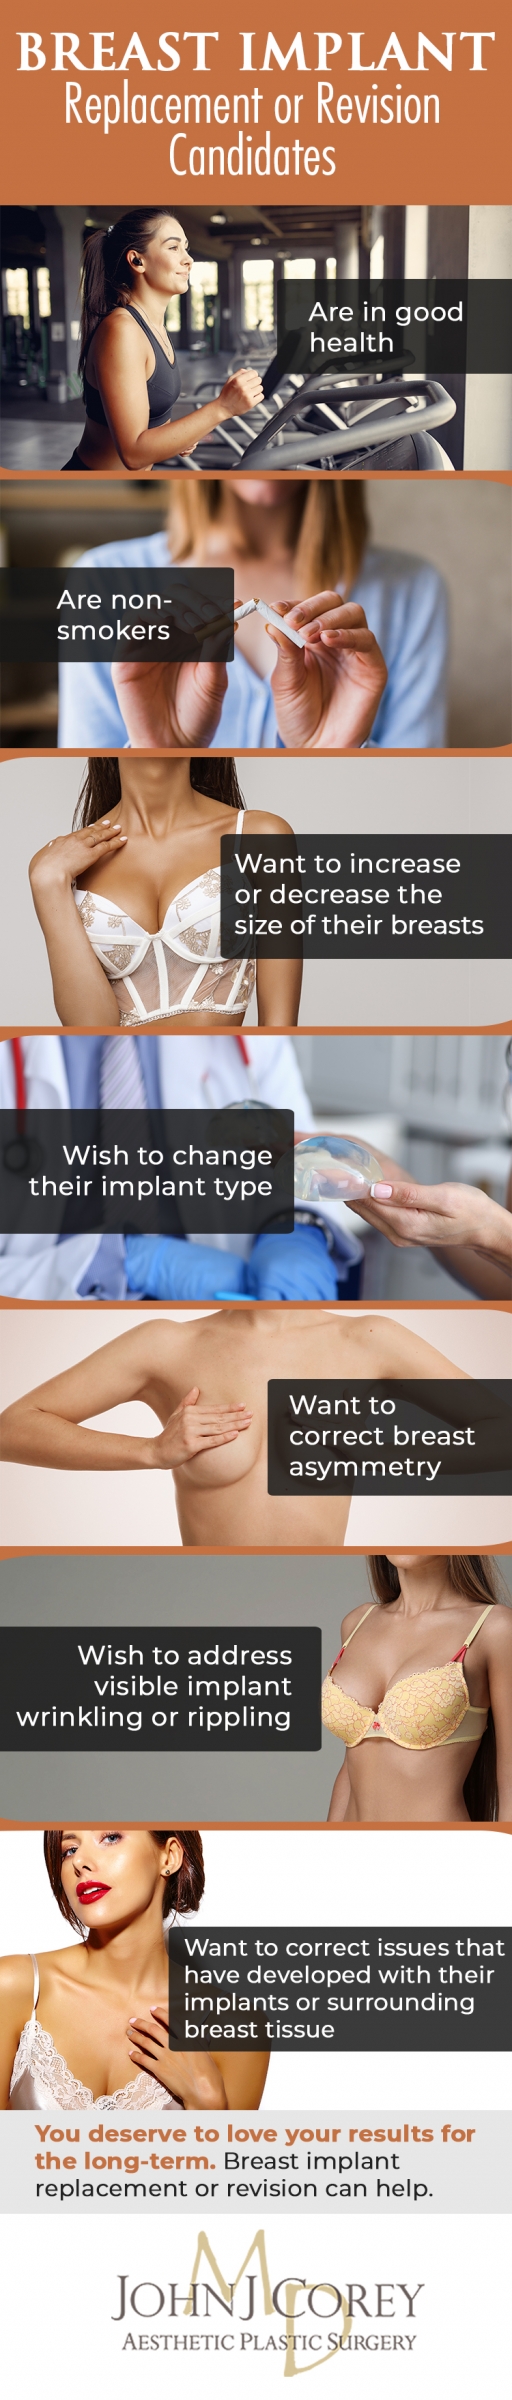 Breast implant revision infographic